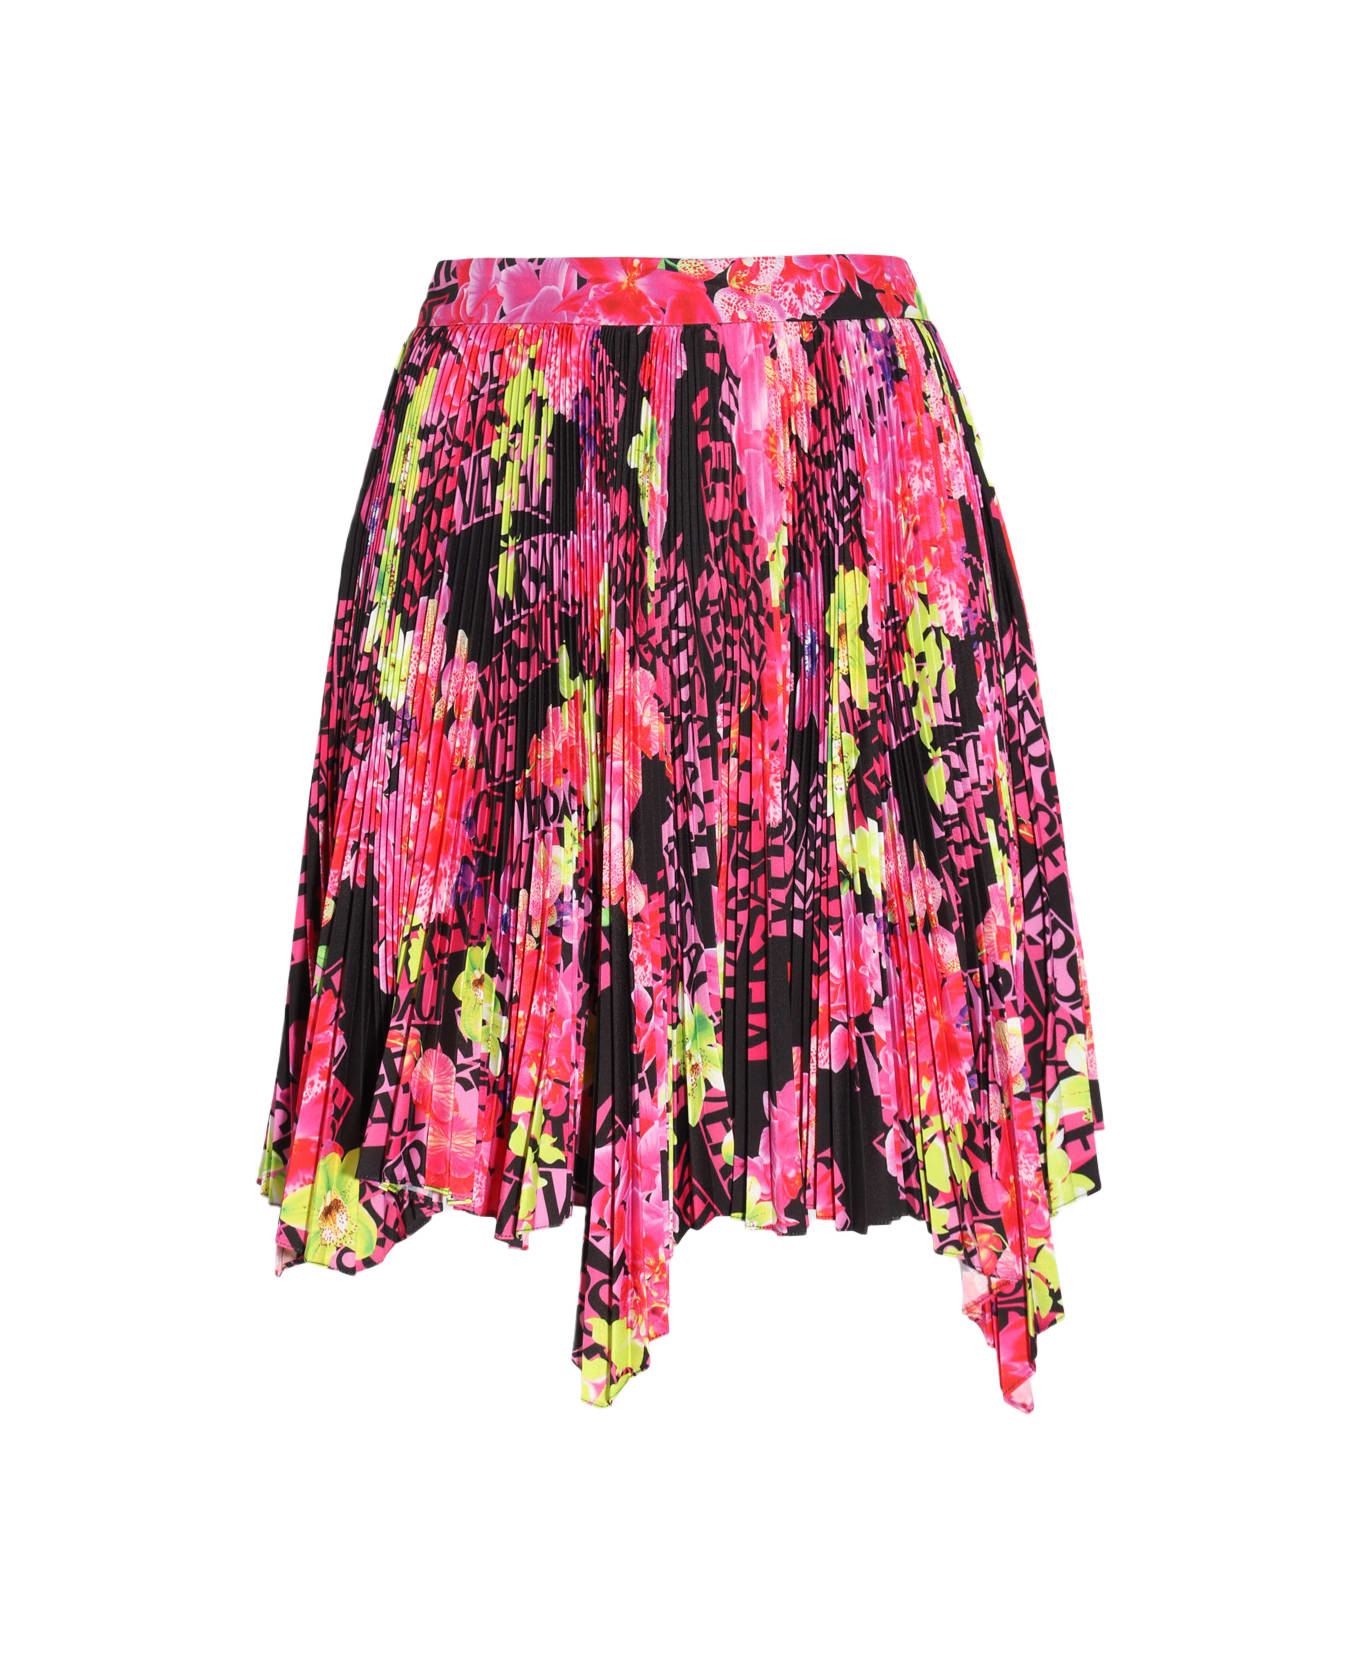 Versace Multicolour Pleated Skirt - ORCHID VERSACE